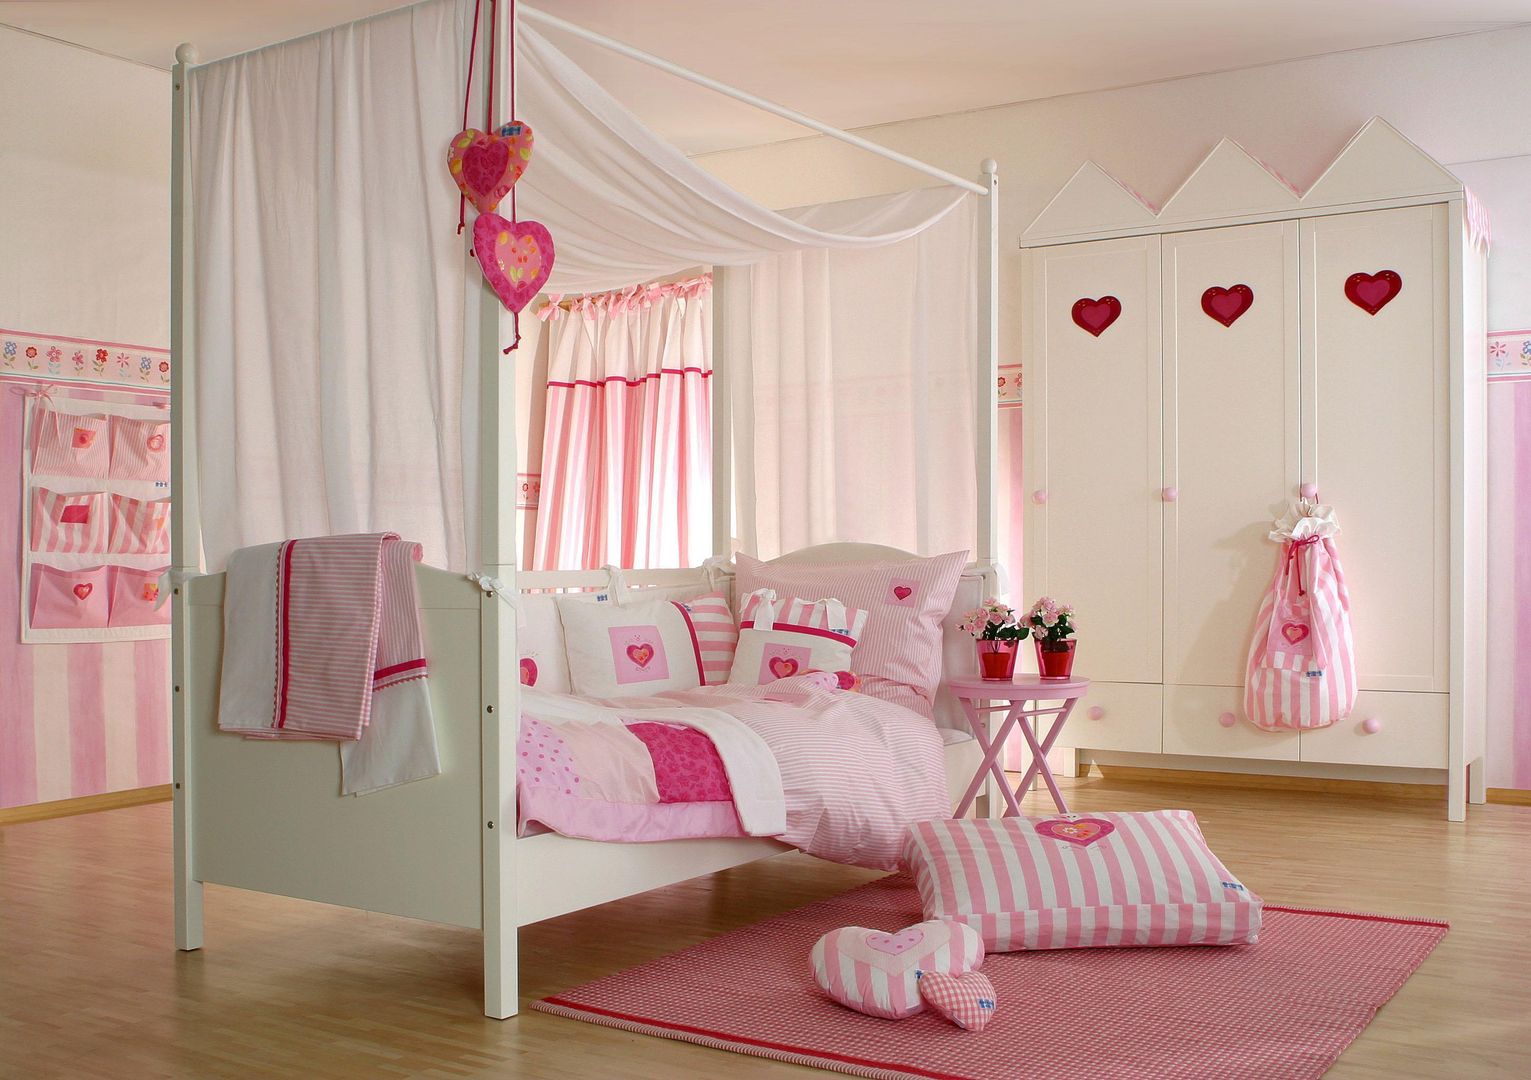 Bed Veil Heaven The Baby Cot Shop, Chelsea Classic style nursery/kids room Beds & cribs